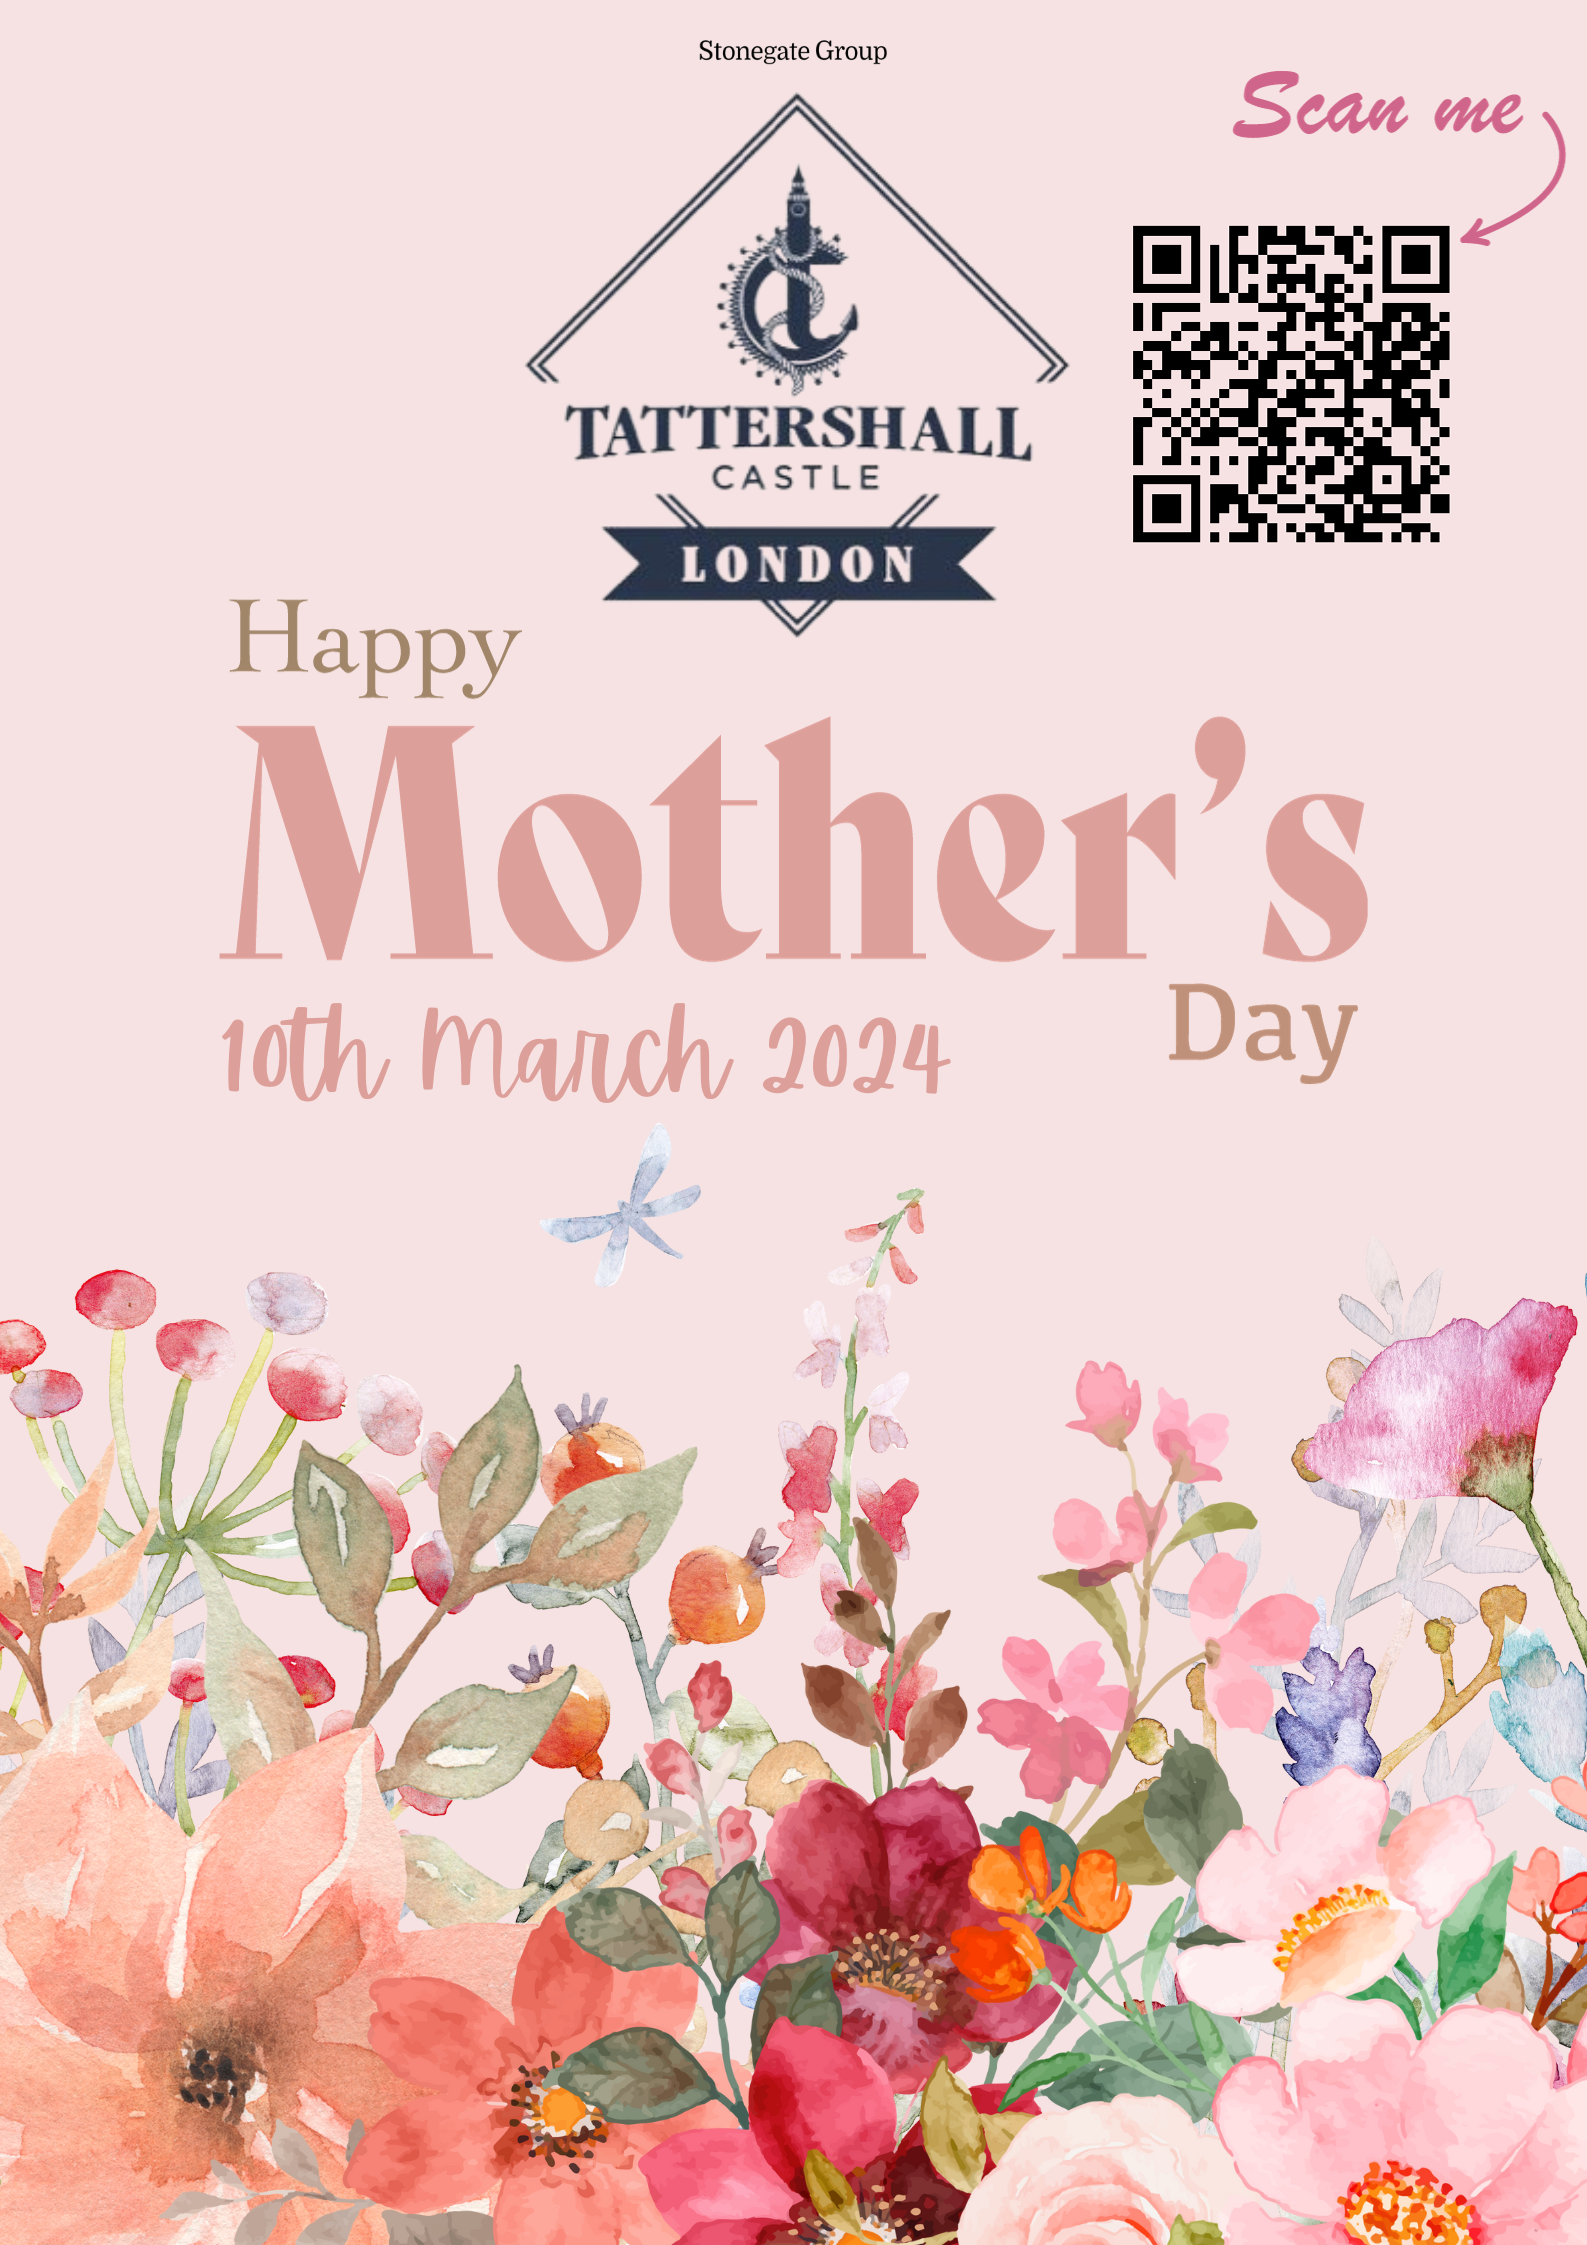 Mothers Day at the Tattershall Castle